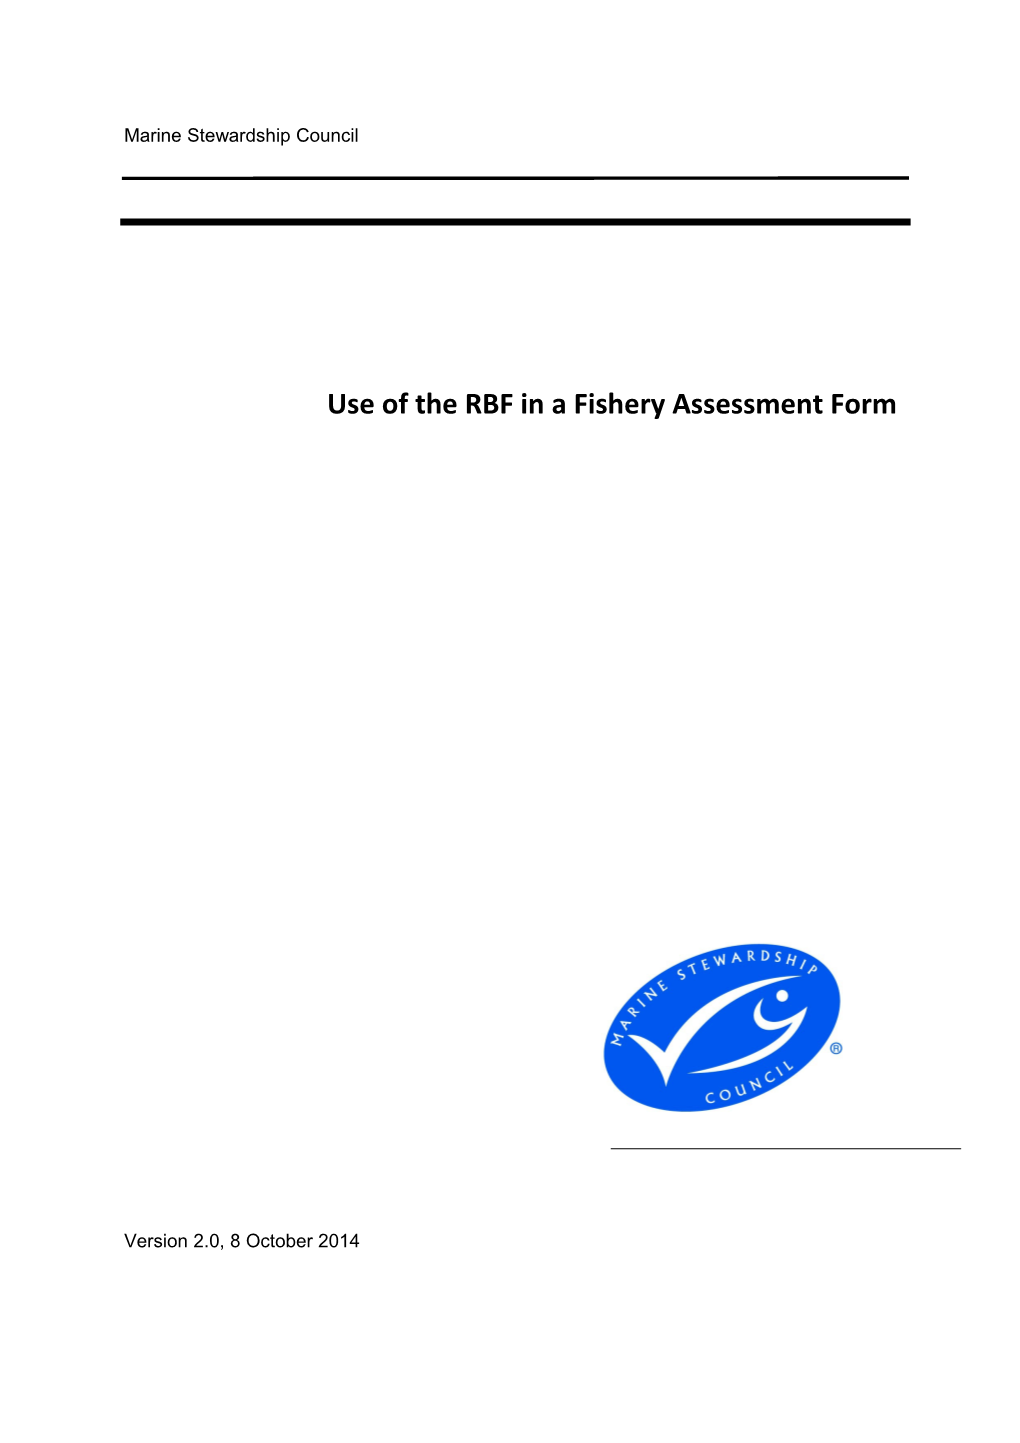 Use of the RBF in a Fishery Assessment Form